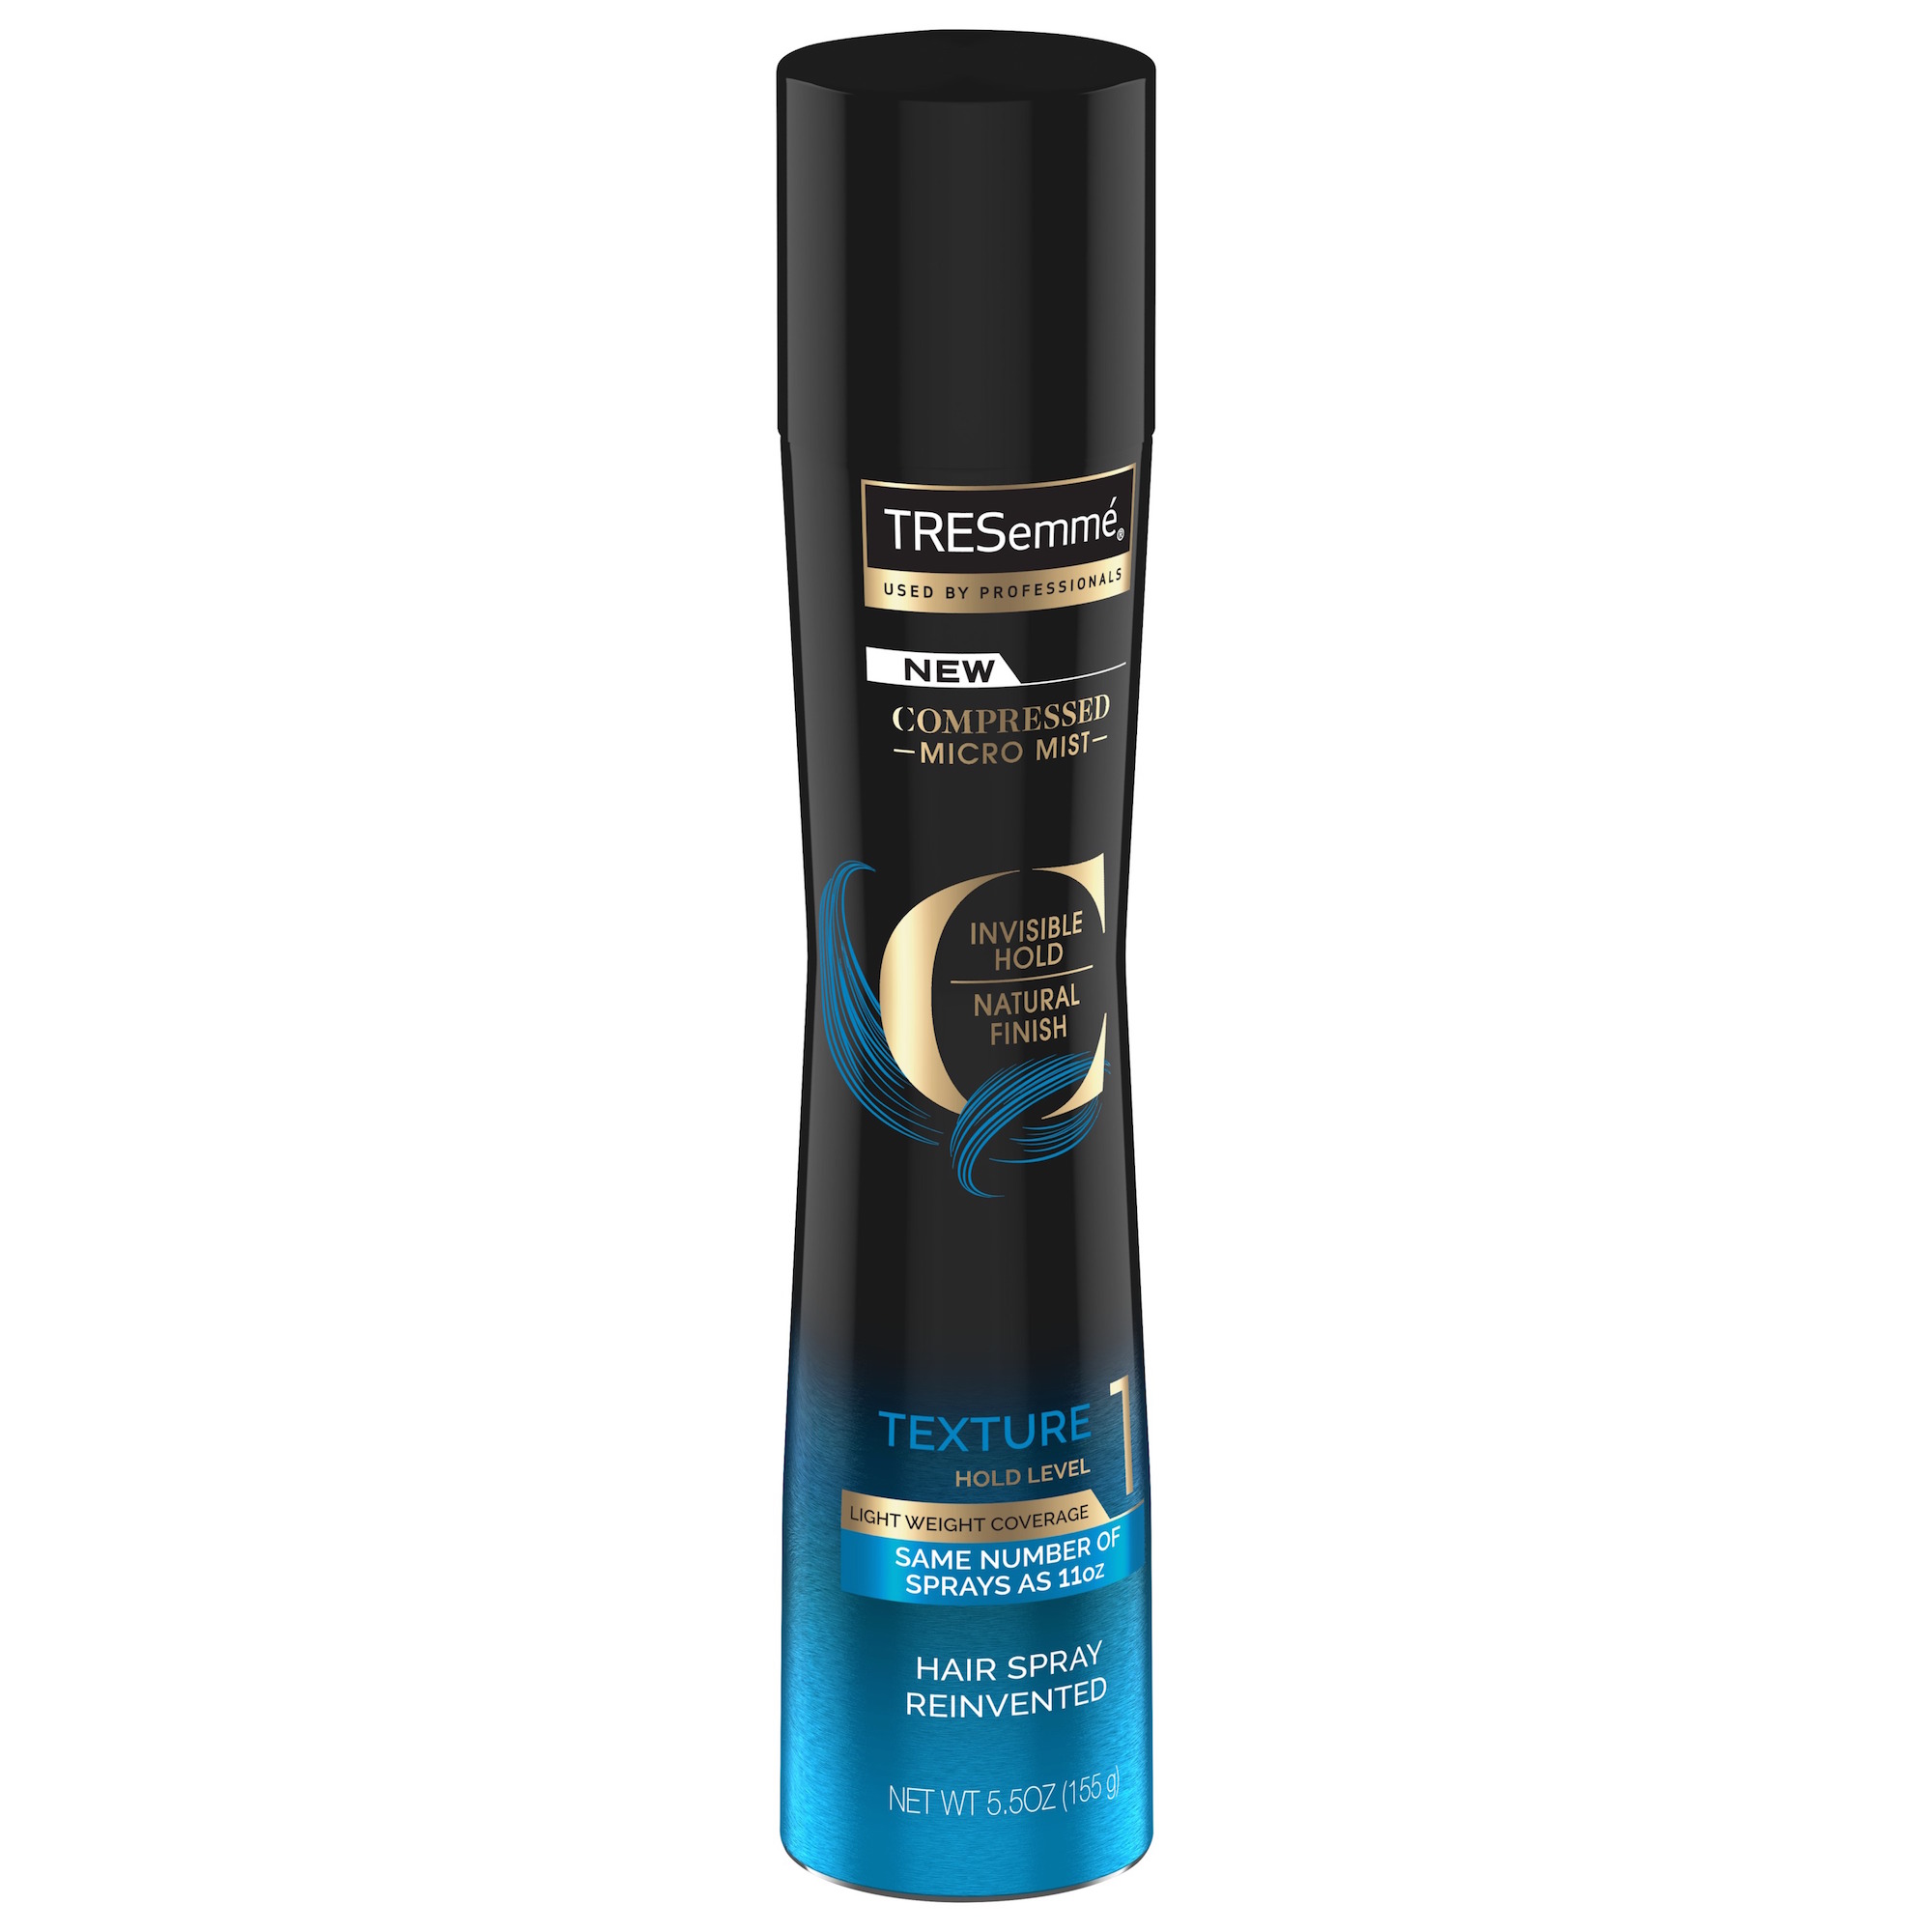 Tresemme Compressed Micro Mist Flexible Hold Hairspray Texture Hold Level 1 5.5 oz - image 3 of 5